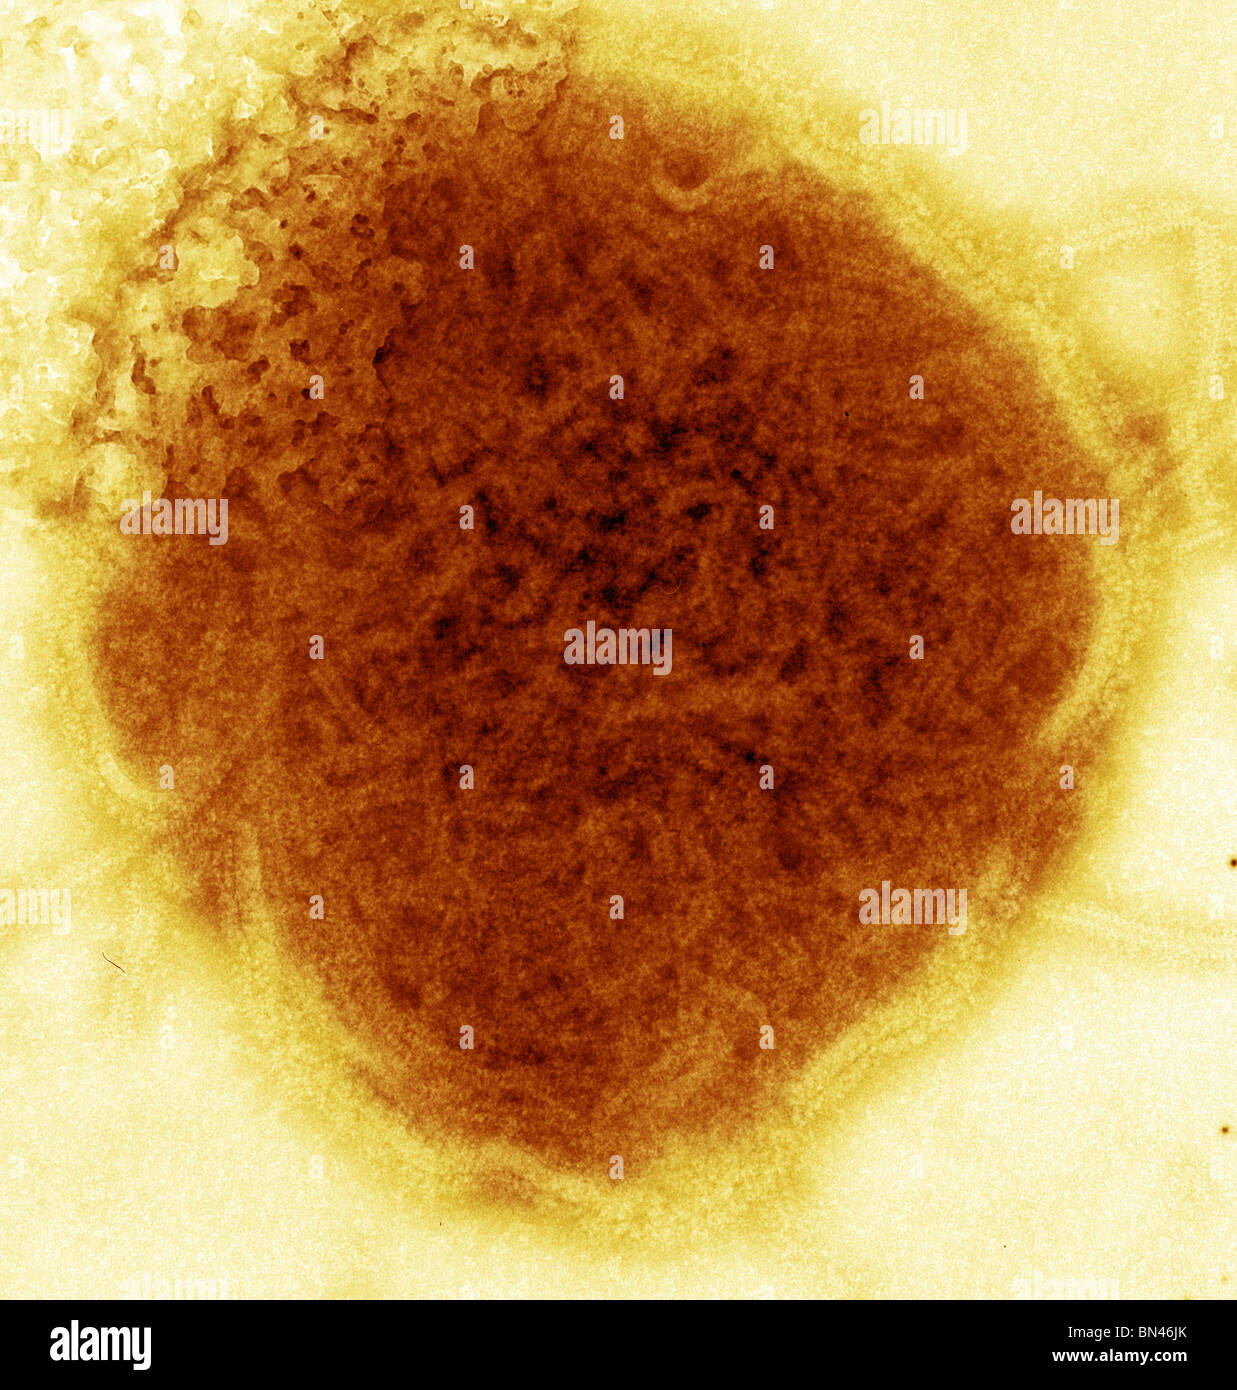 Negative stained transmission electron micrograph (TEM) of mumps virus Stock Photo